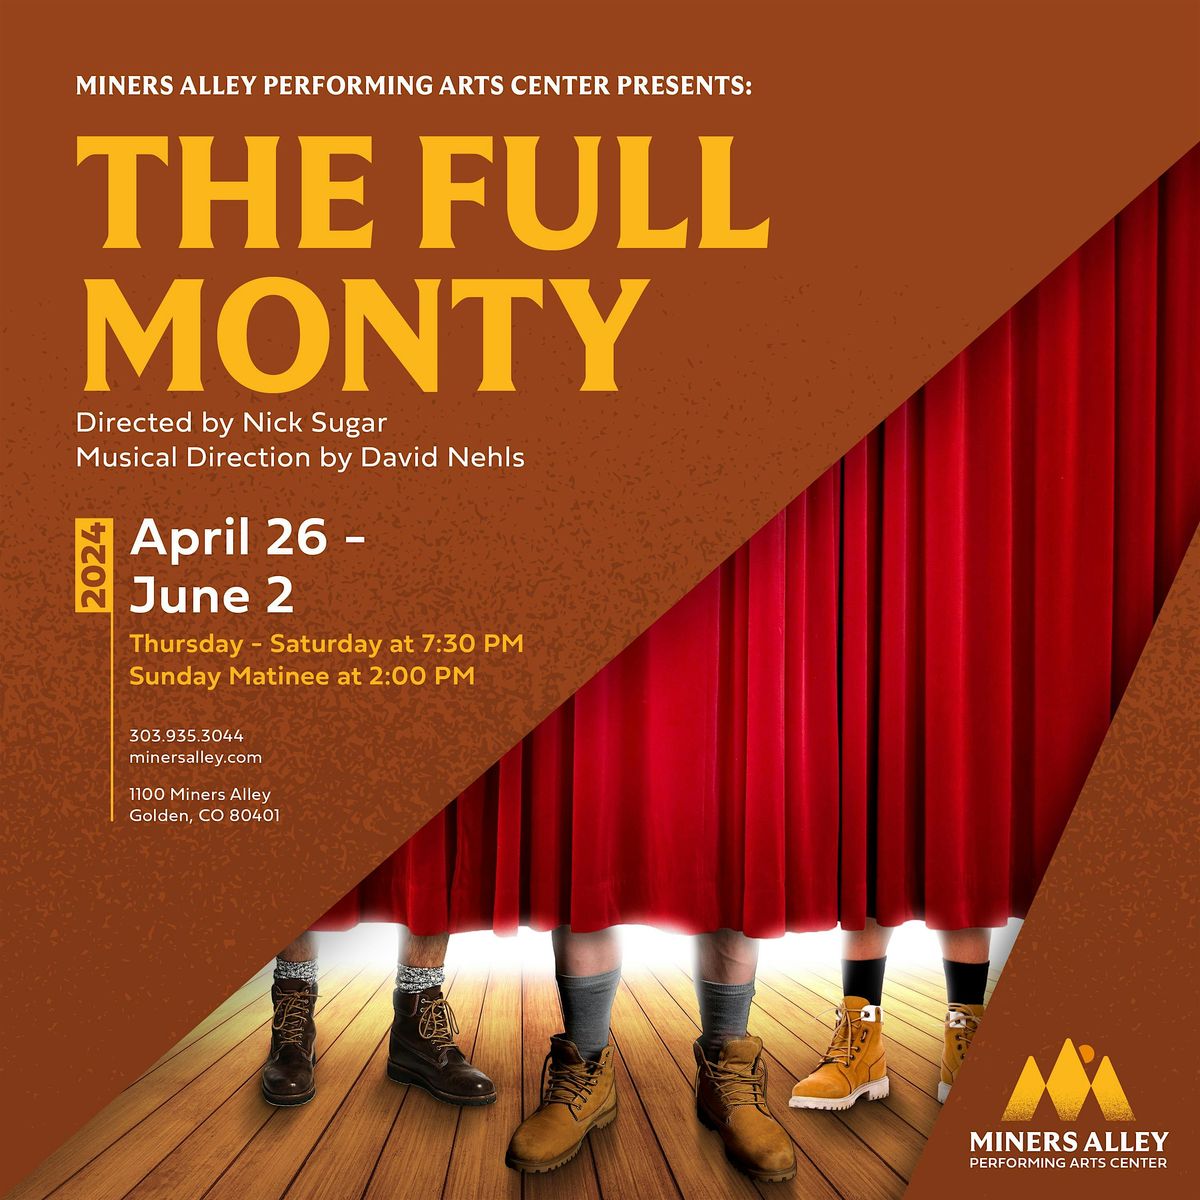 THE FULL MONTY at Miners Alley Performing Arts Center